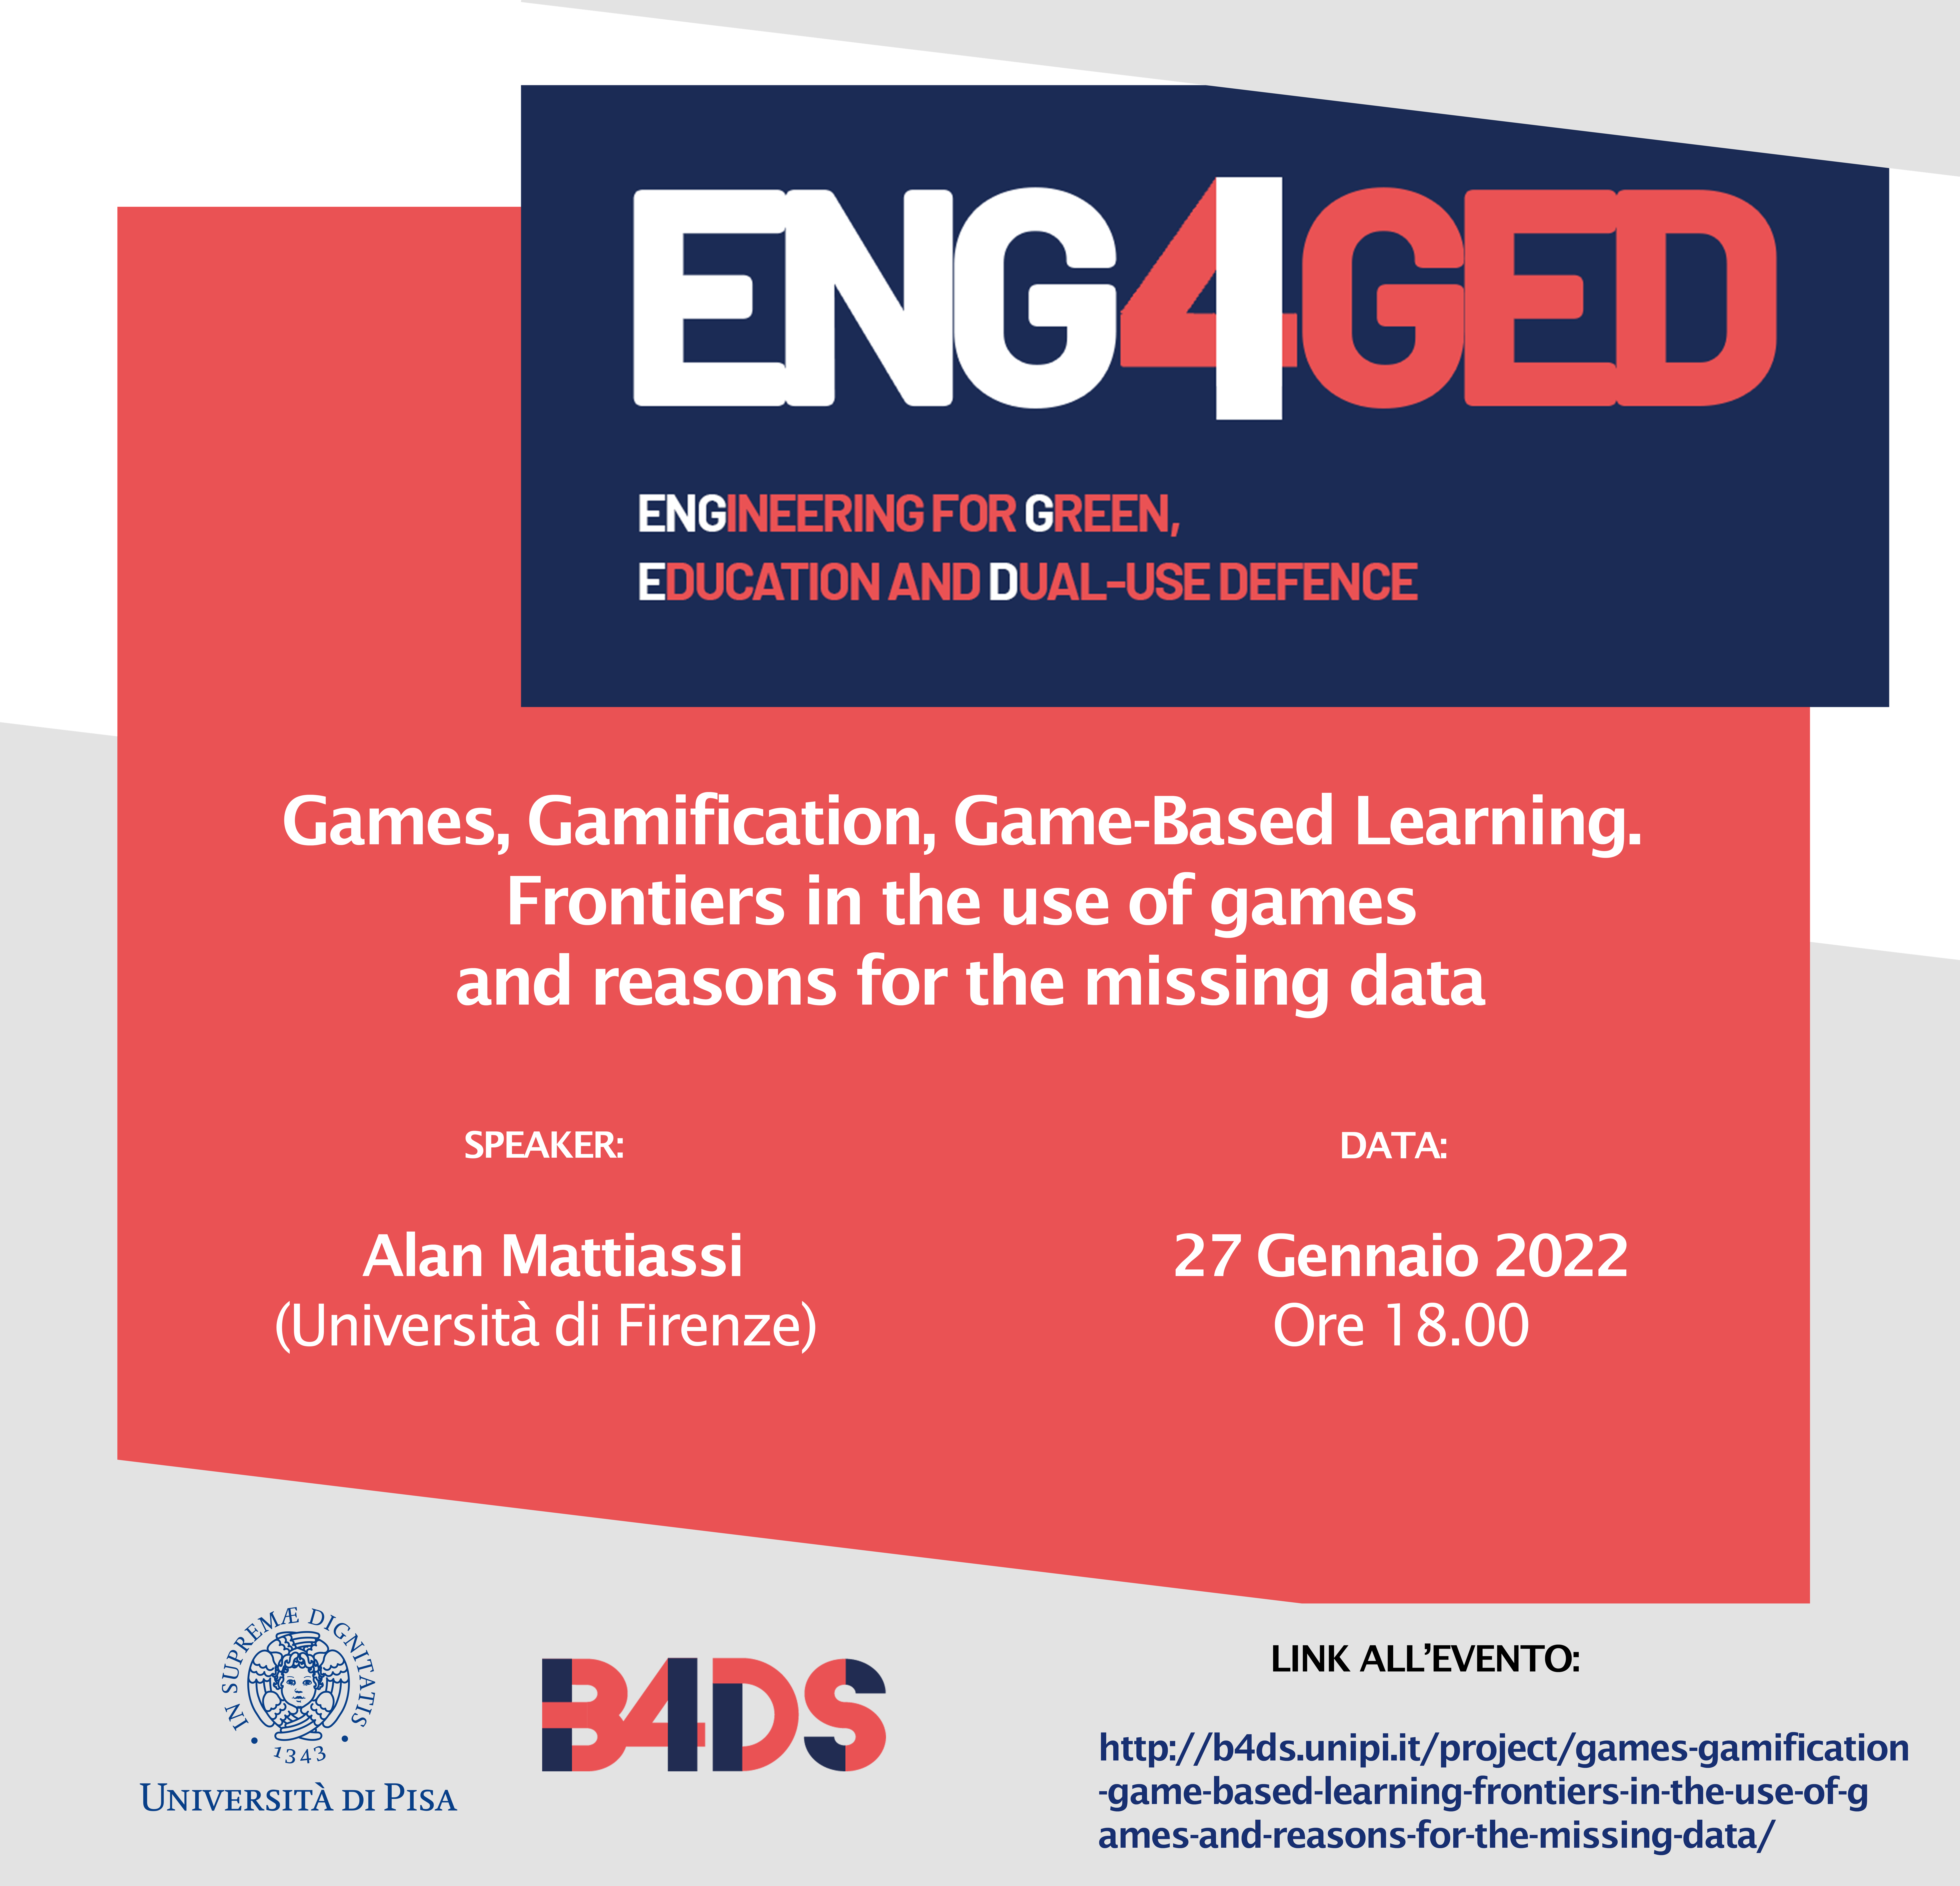 Games, Gamification, Game-Based Learning. Frontiers in the use of games and reasons for the missing data